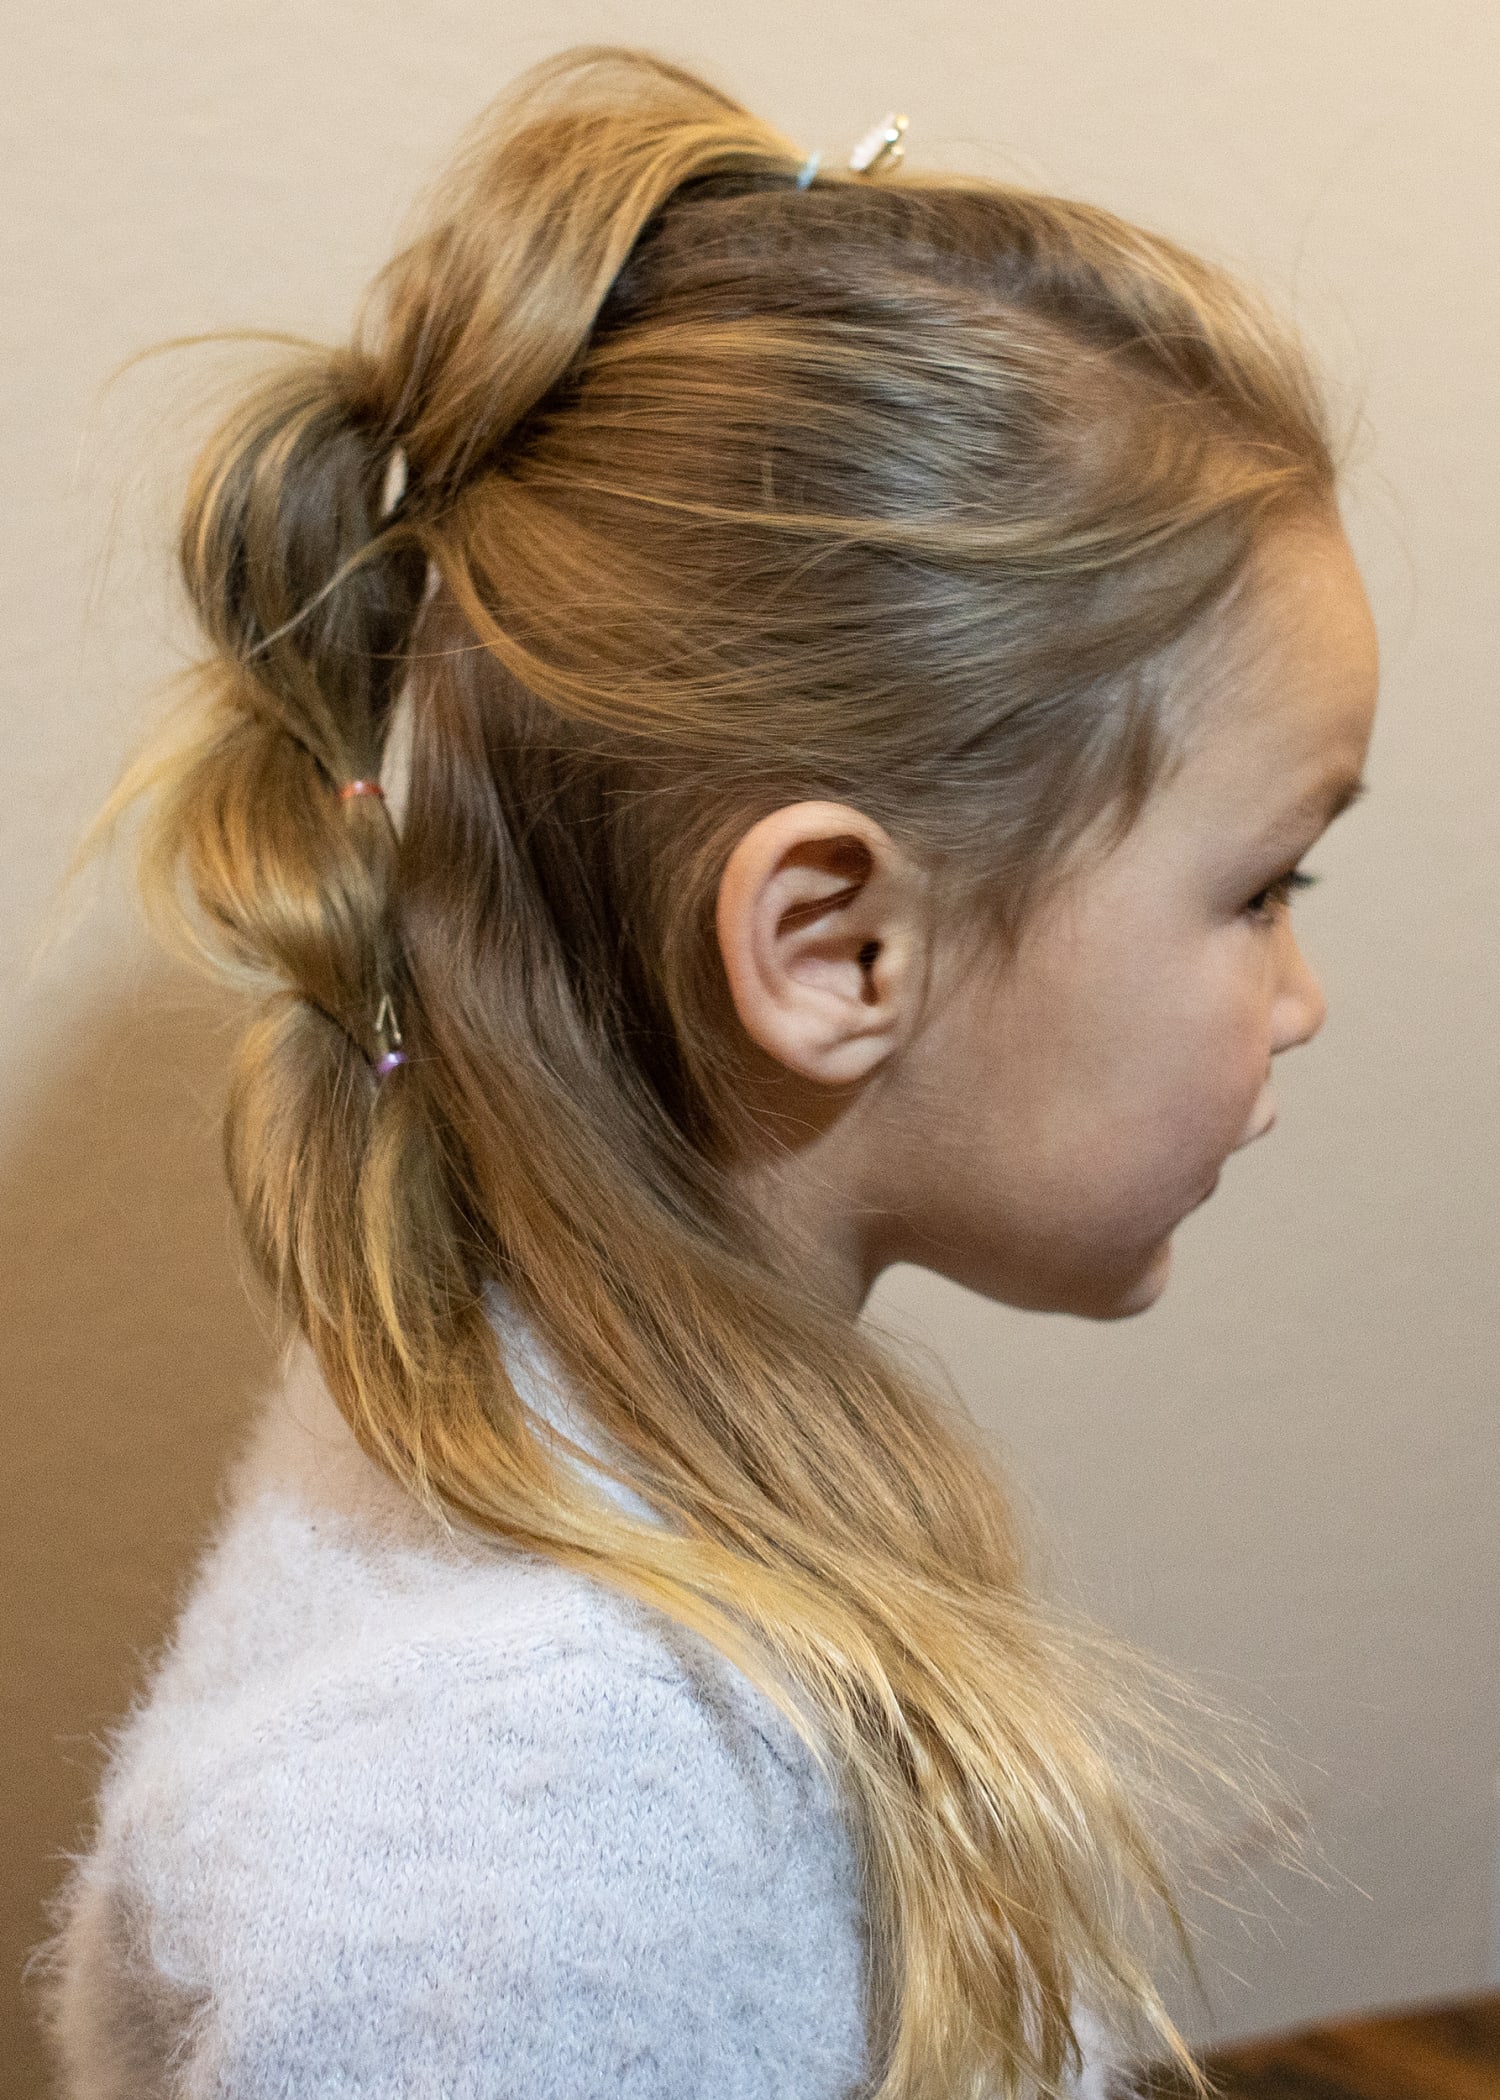 5 easy braids for girls to try now